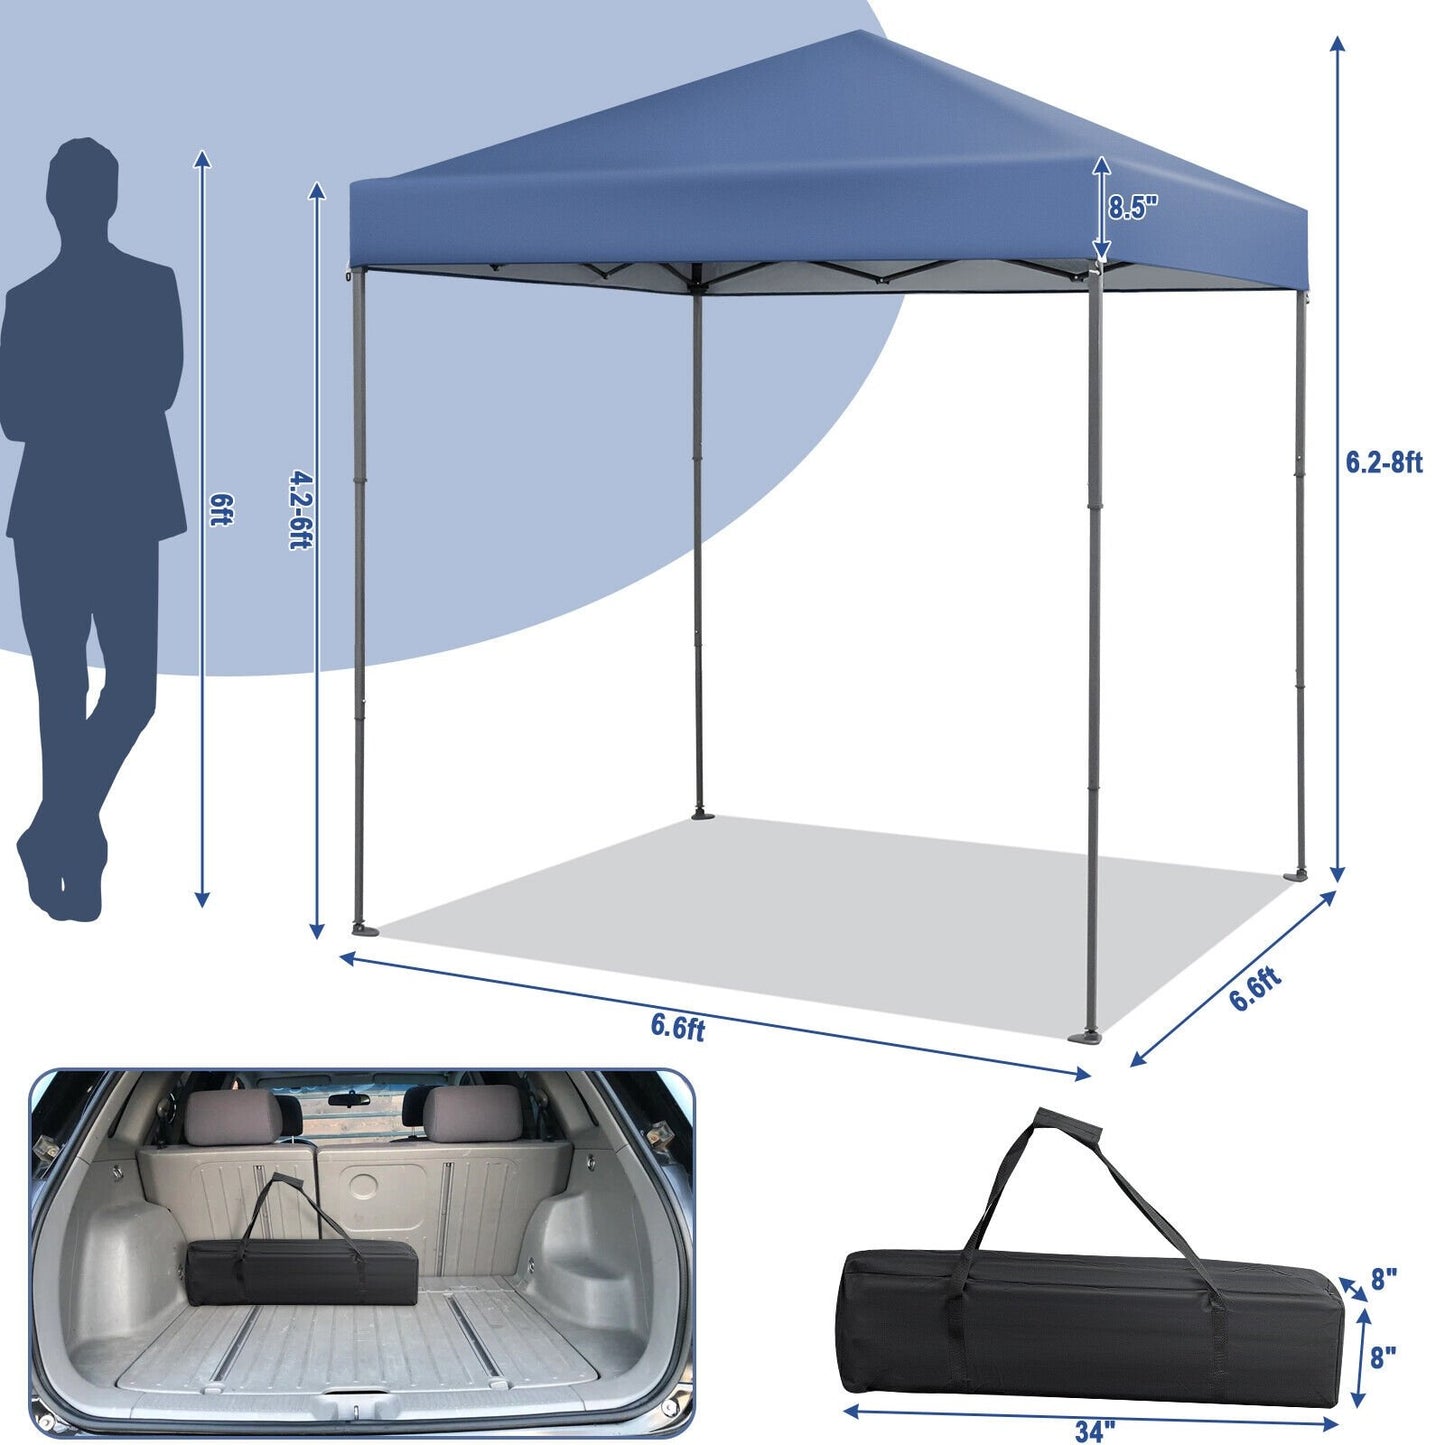 6.6 x 6.6 Feet Outdoor Pop-up Canopy Tent with UPF 50+ Sun Protection, Blue